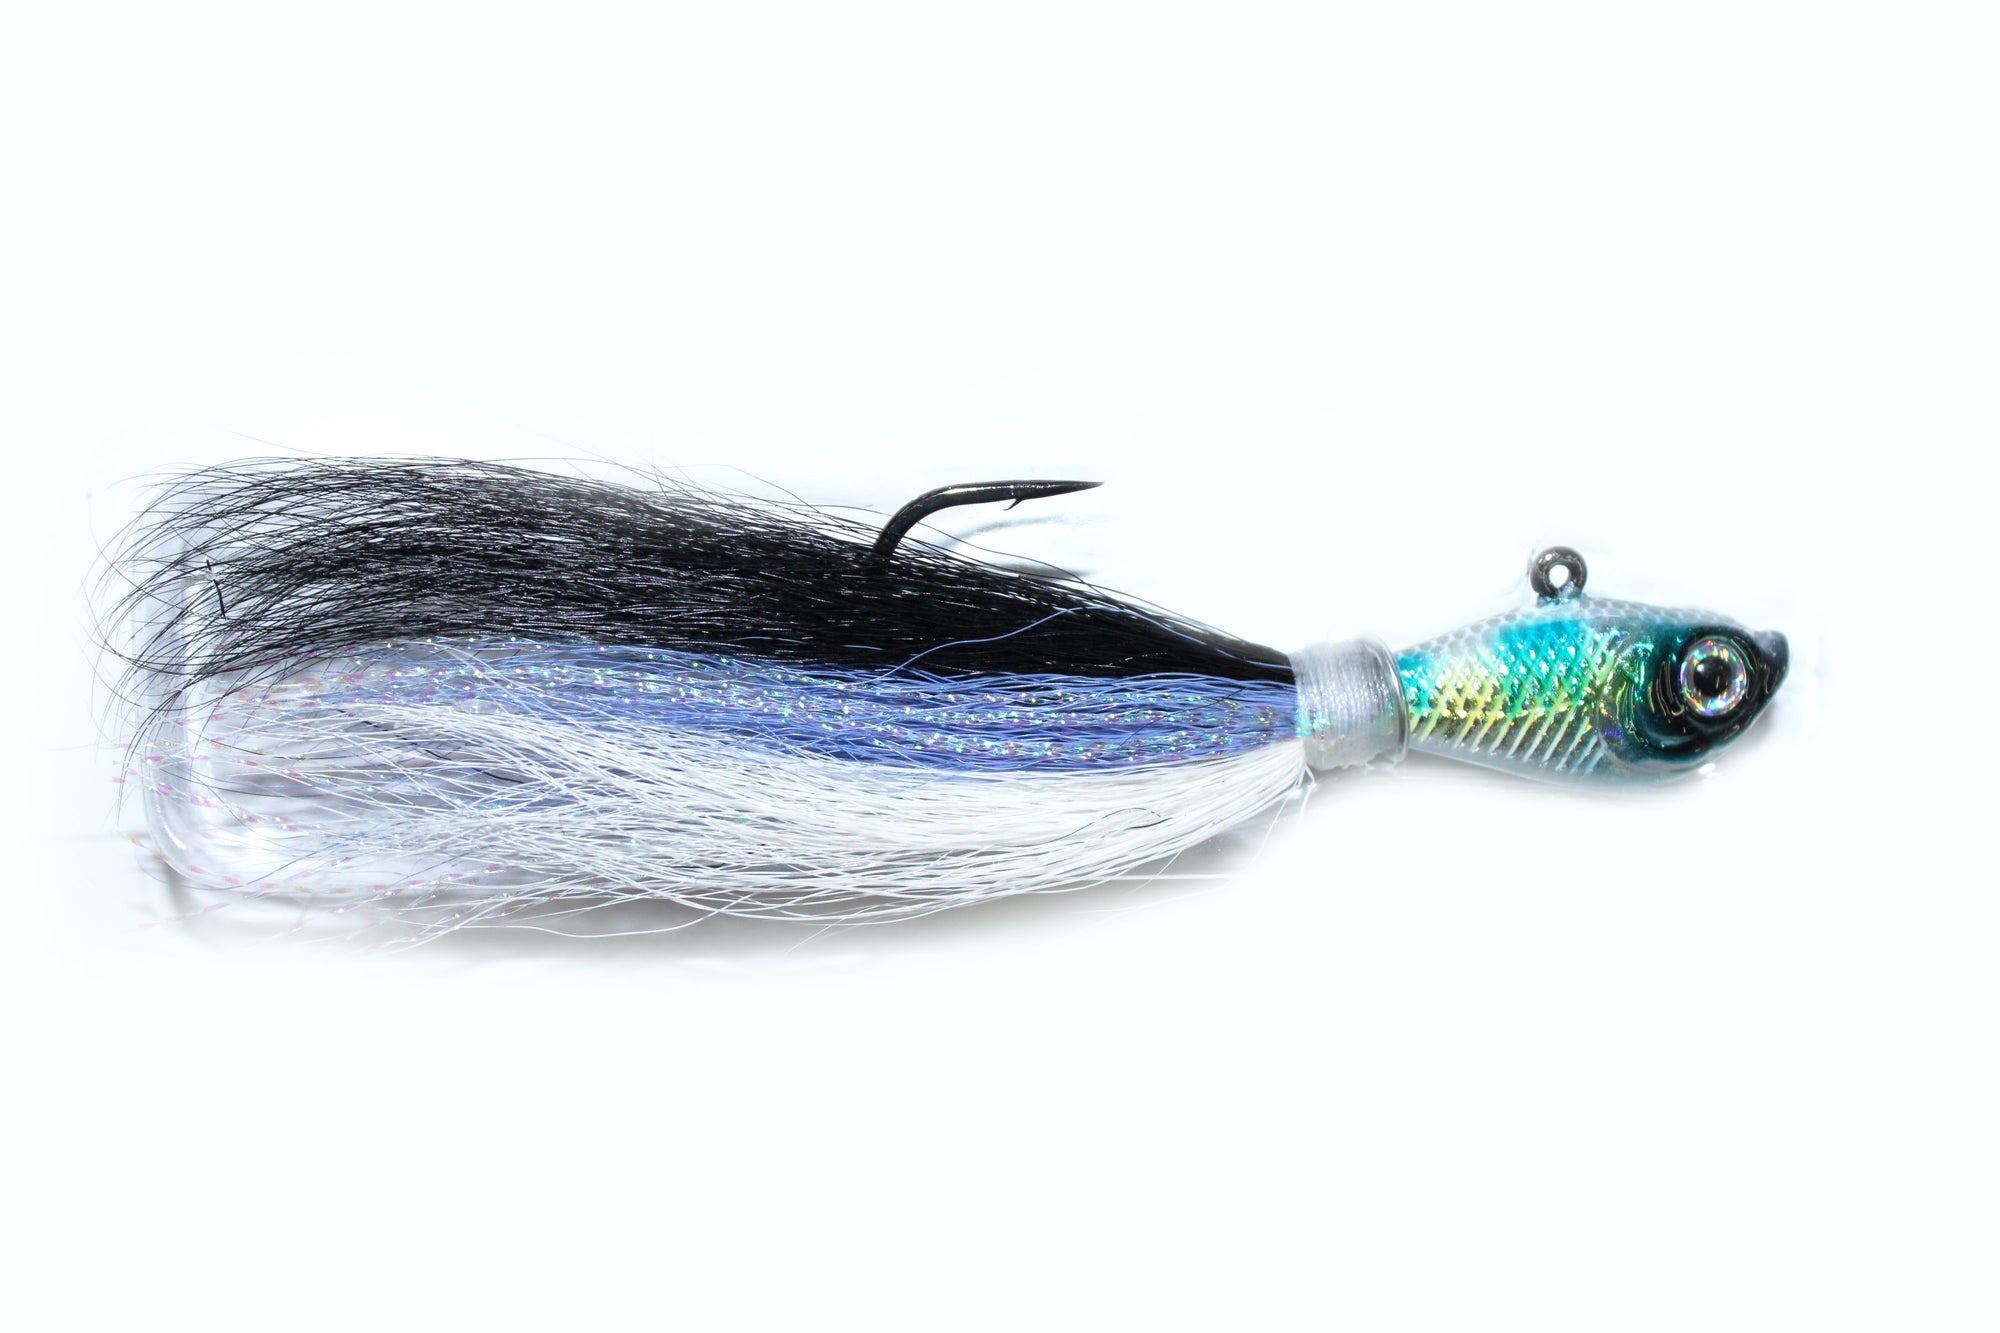 SPRO Bucktail Jig - The Fishing Specialist